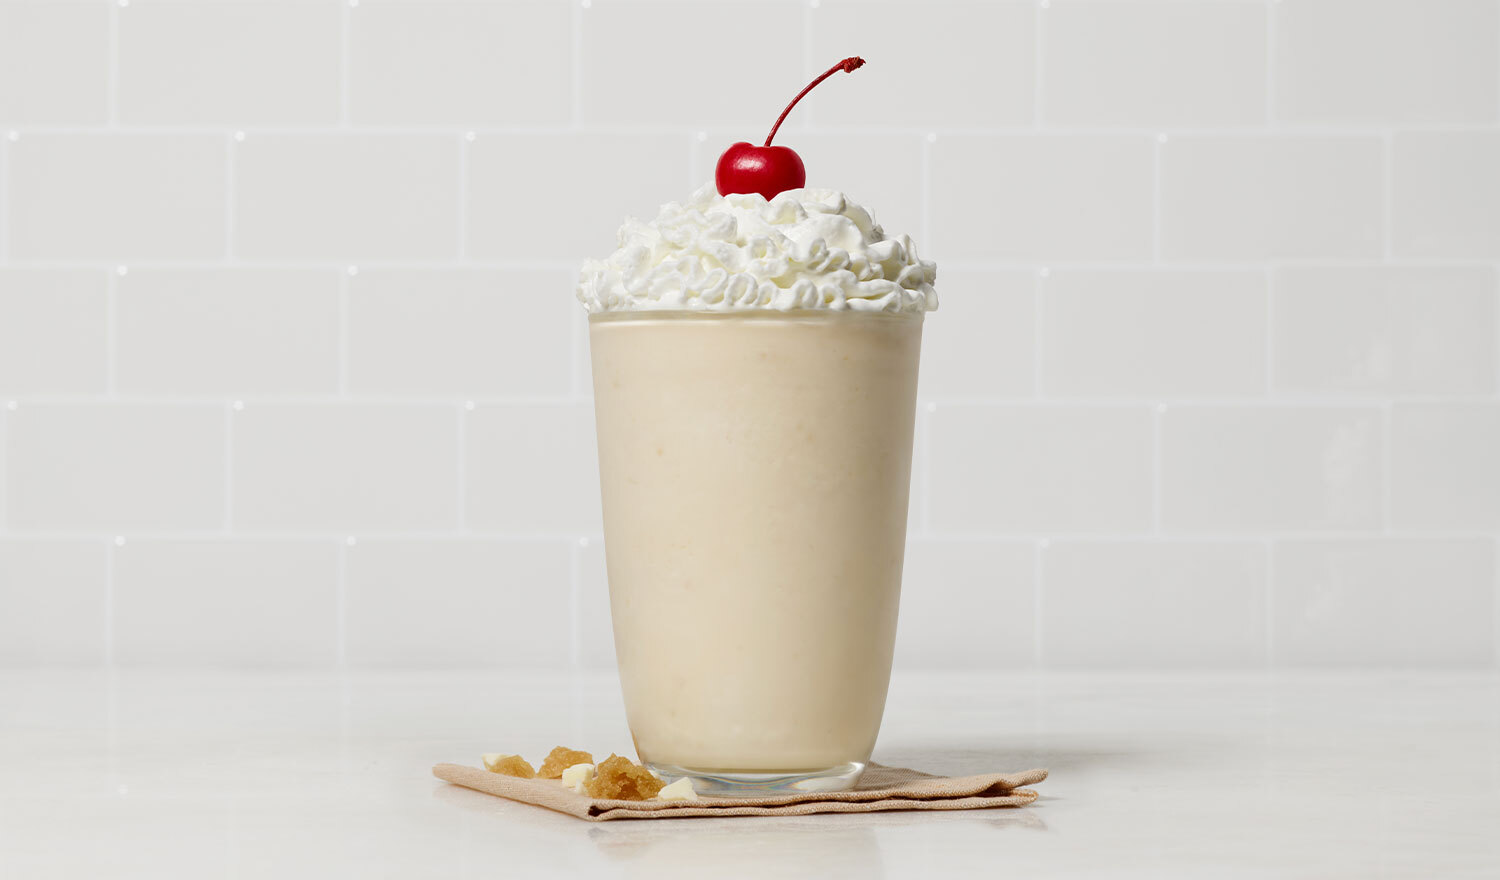 Chick-fil-A introduces its seventh seasonal milkshake featuring butterscotch caramel flavors with blondie cookie crumbles.